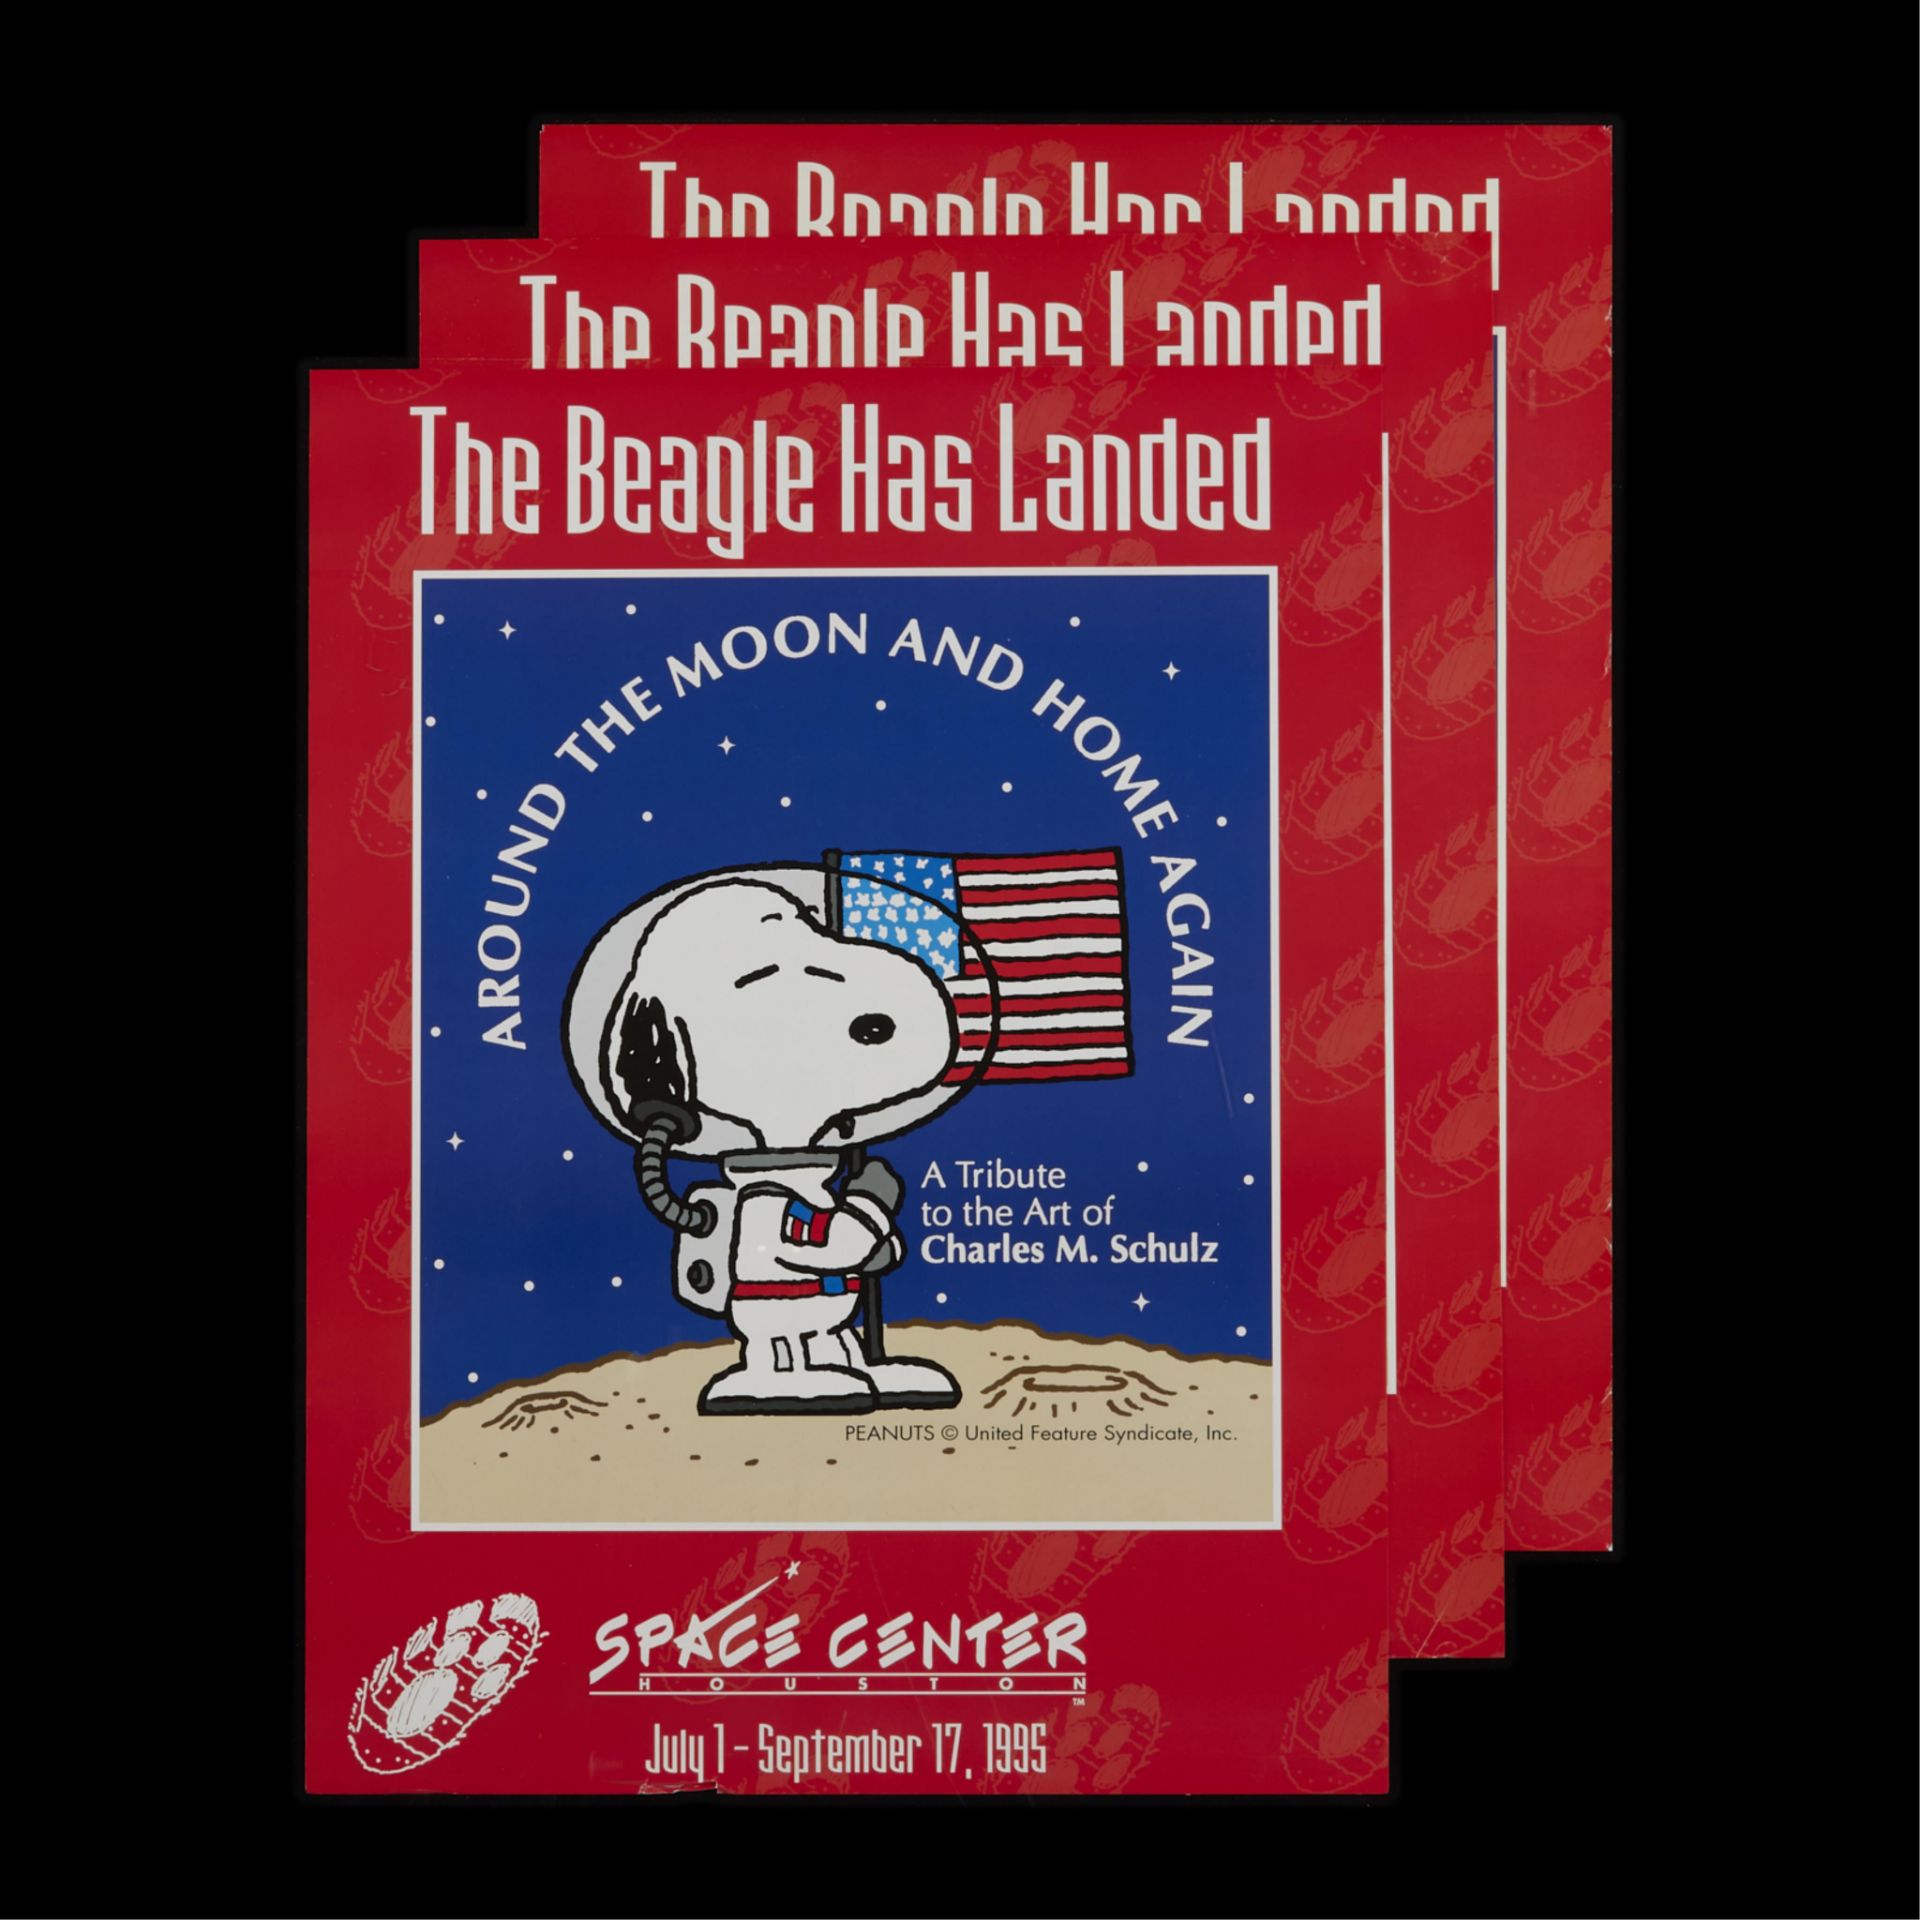 17 Charles Schulz Tribute Exhibition Posters - Image 8 of 8